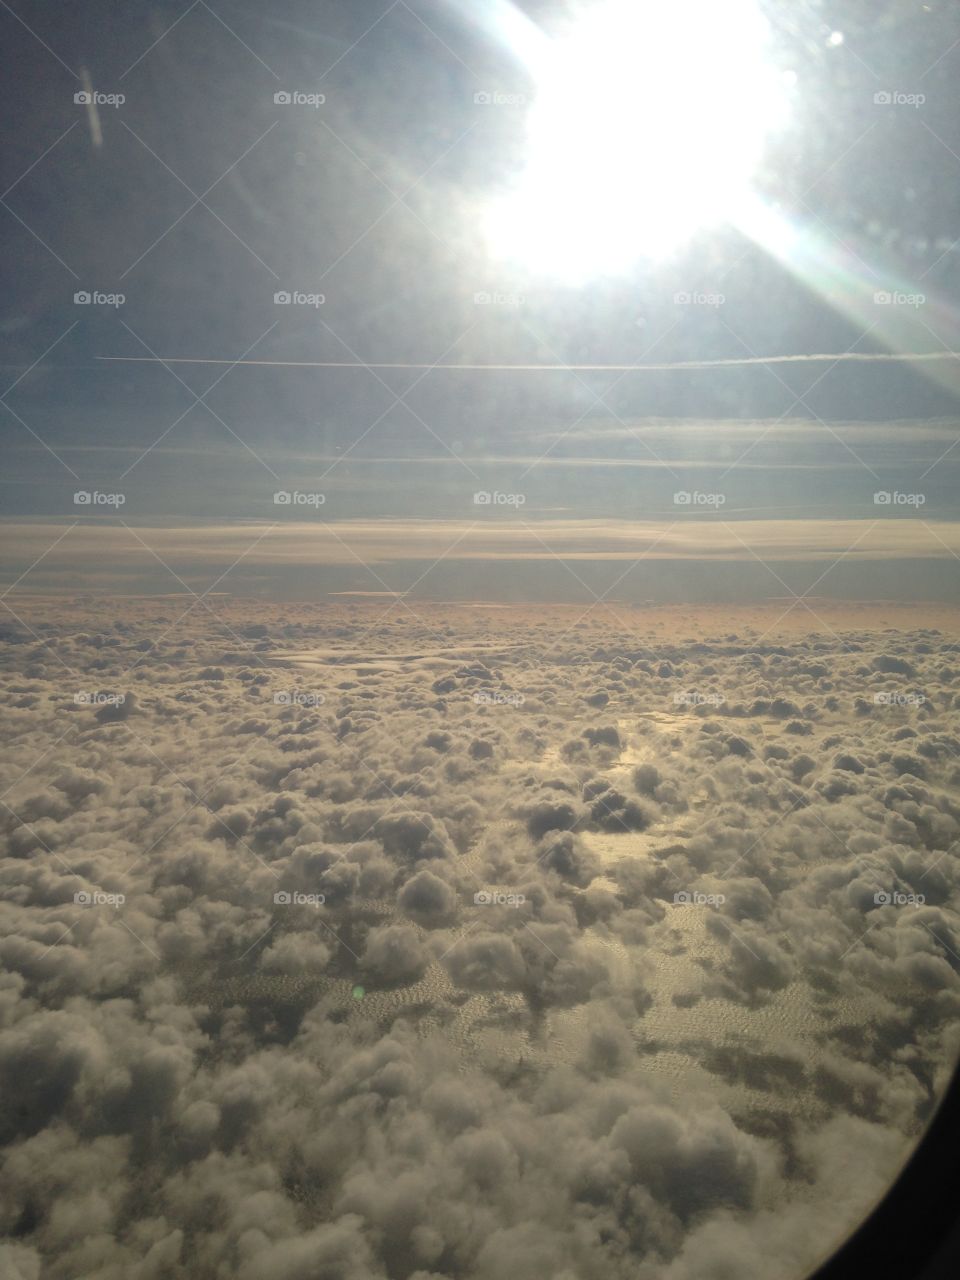 Out of the plane window 